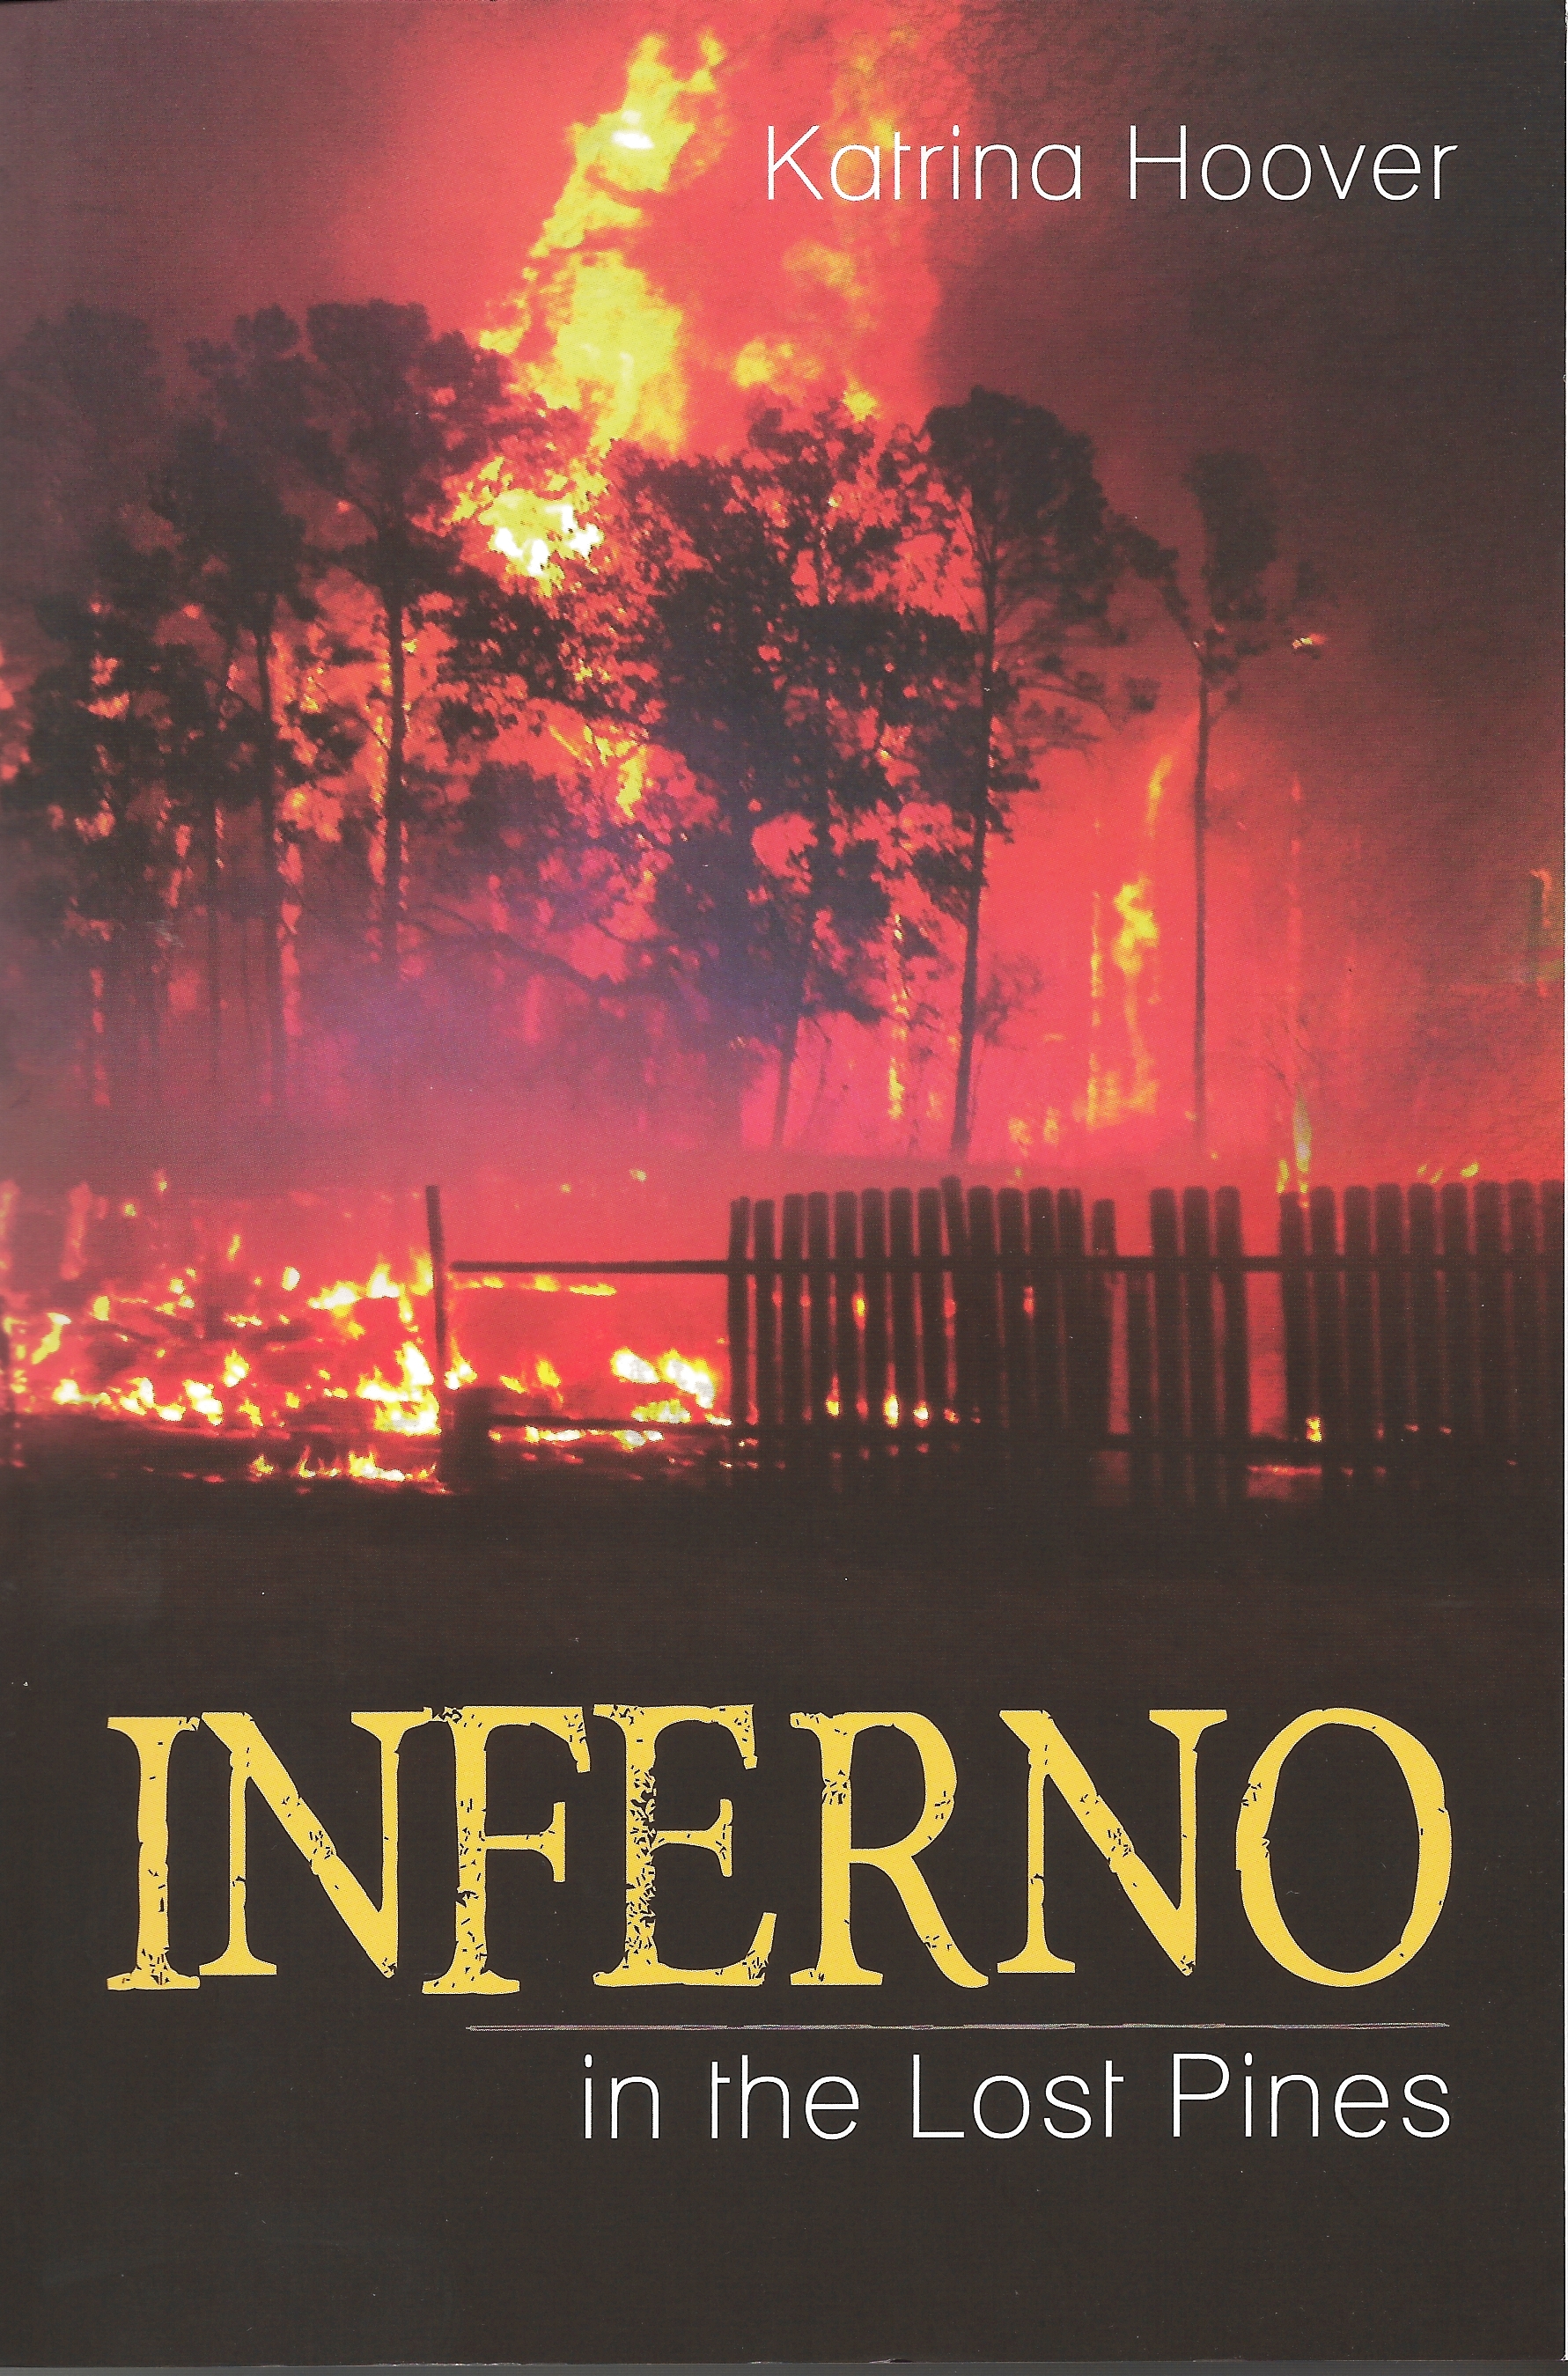 INFERNO IN THE LOST PINES Katrina Hoover